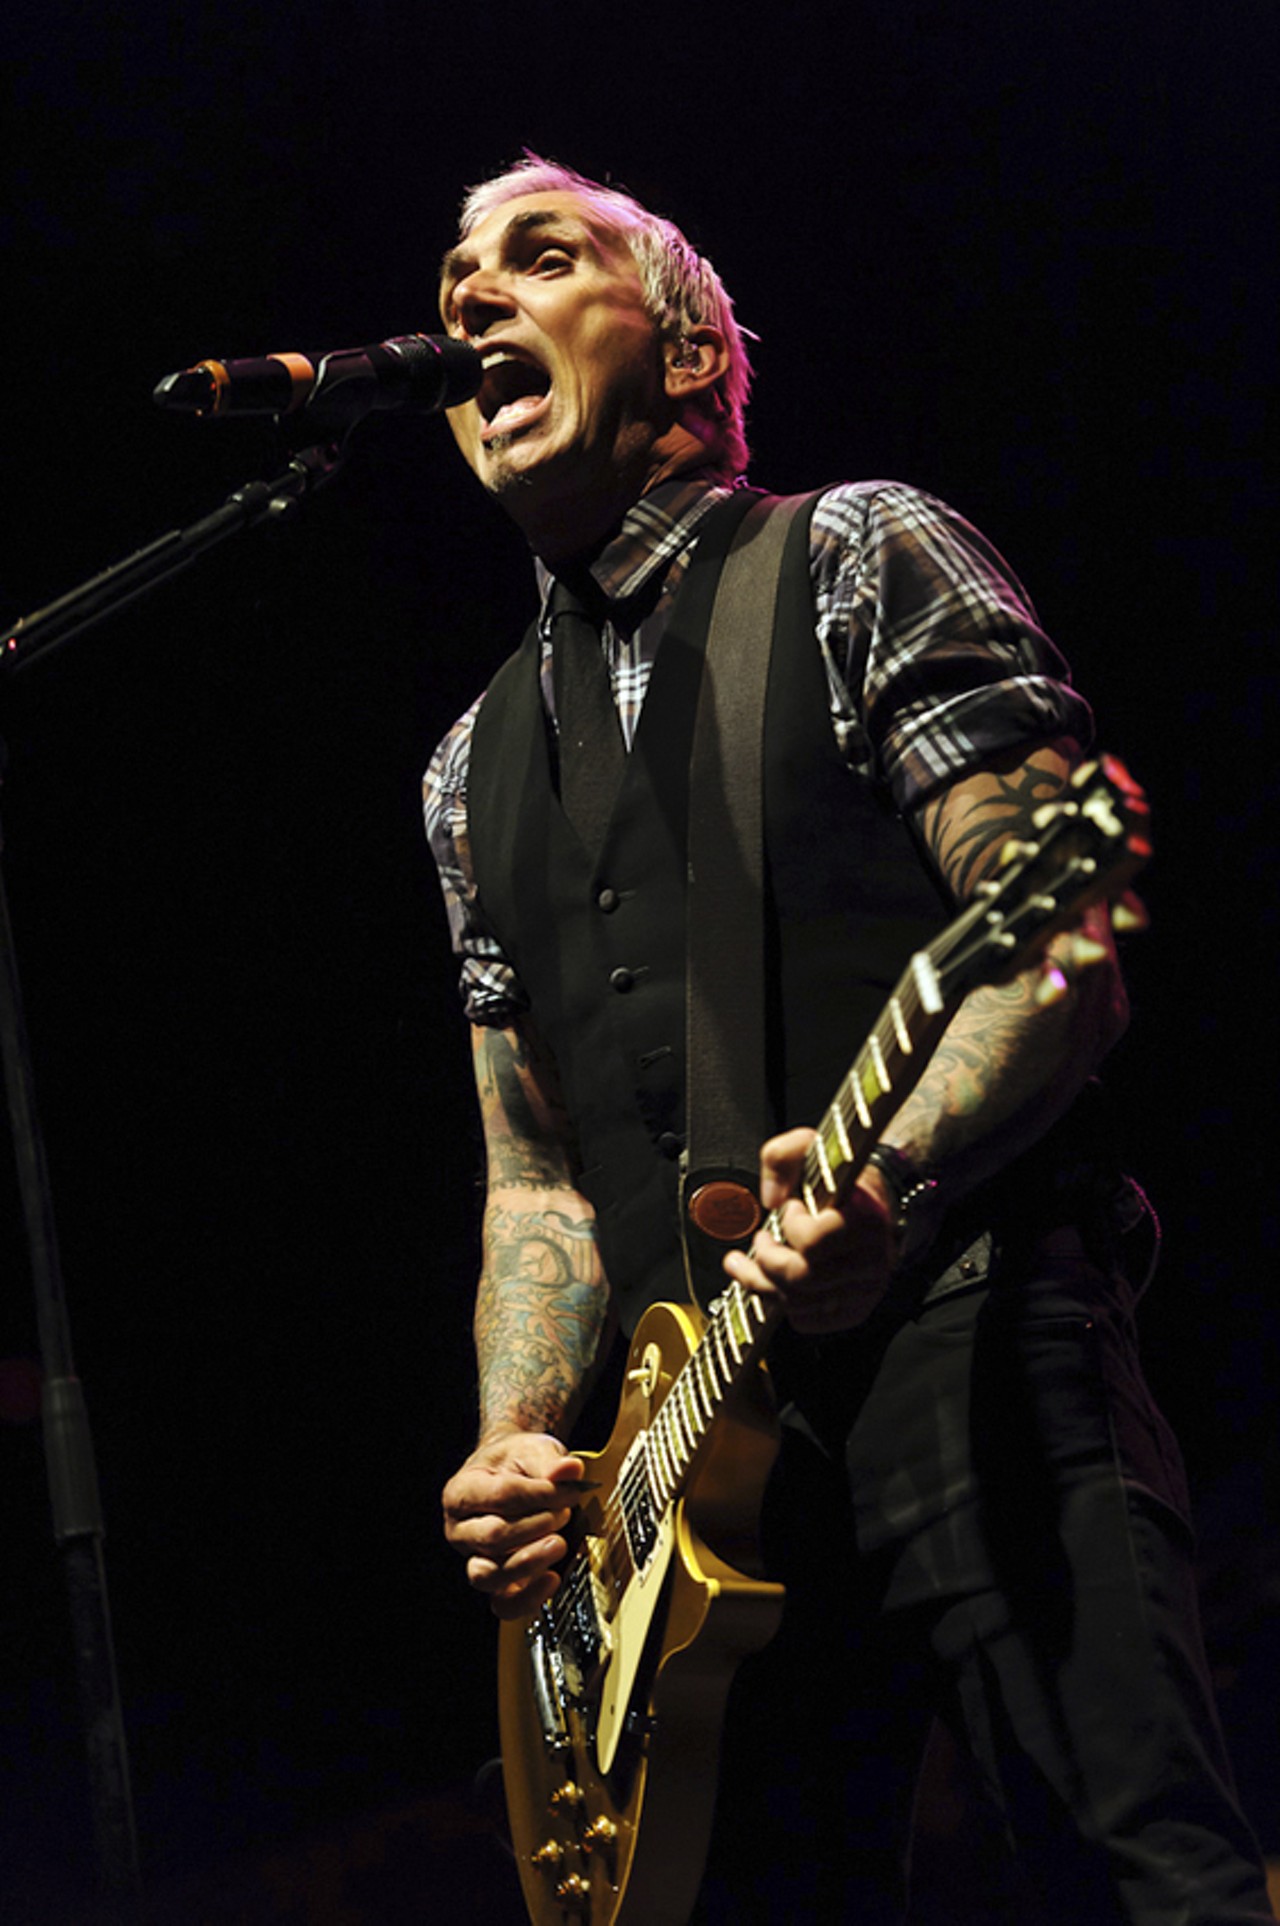 Art Alexakis of Everclear, performing as part of the Summerland Tour at The Family Arena in St. Charles.